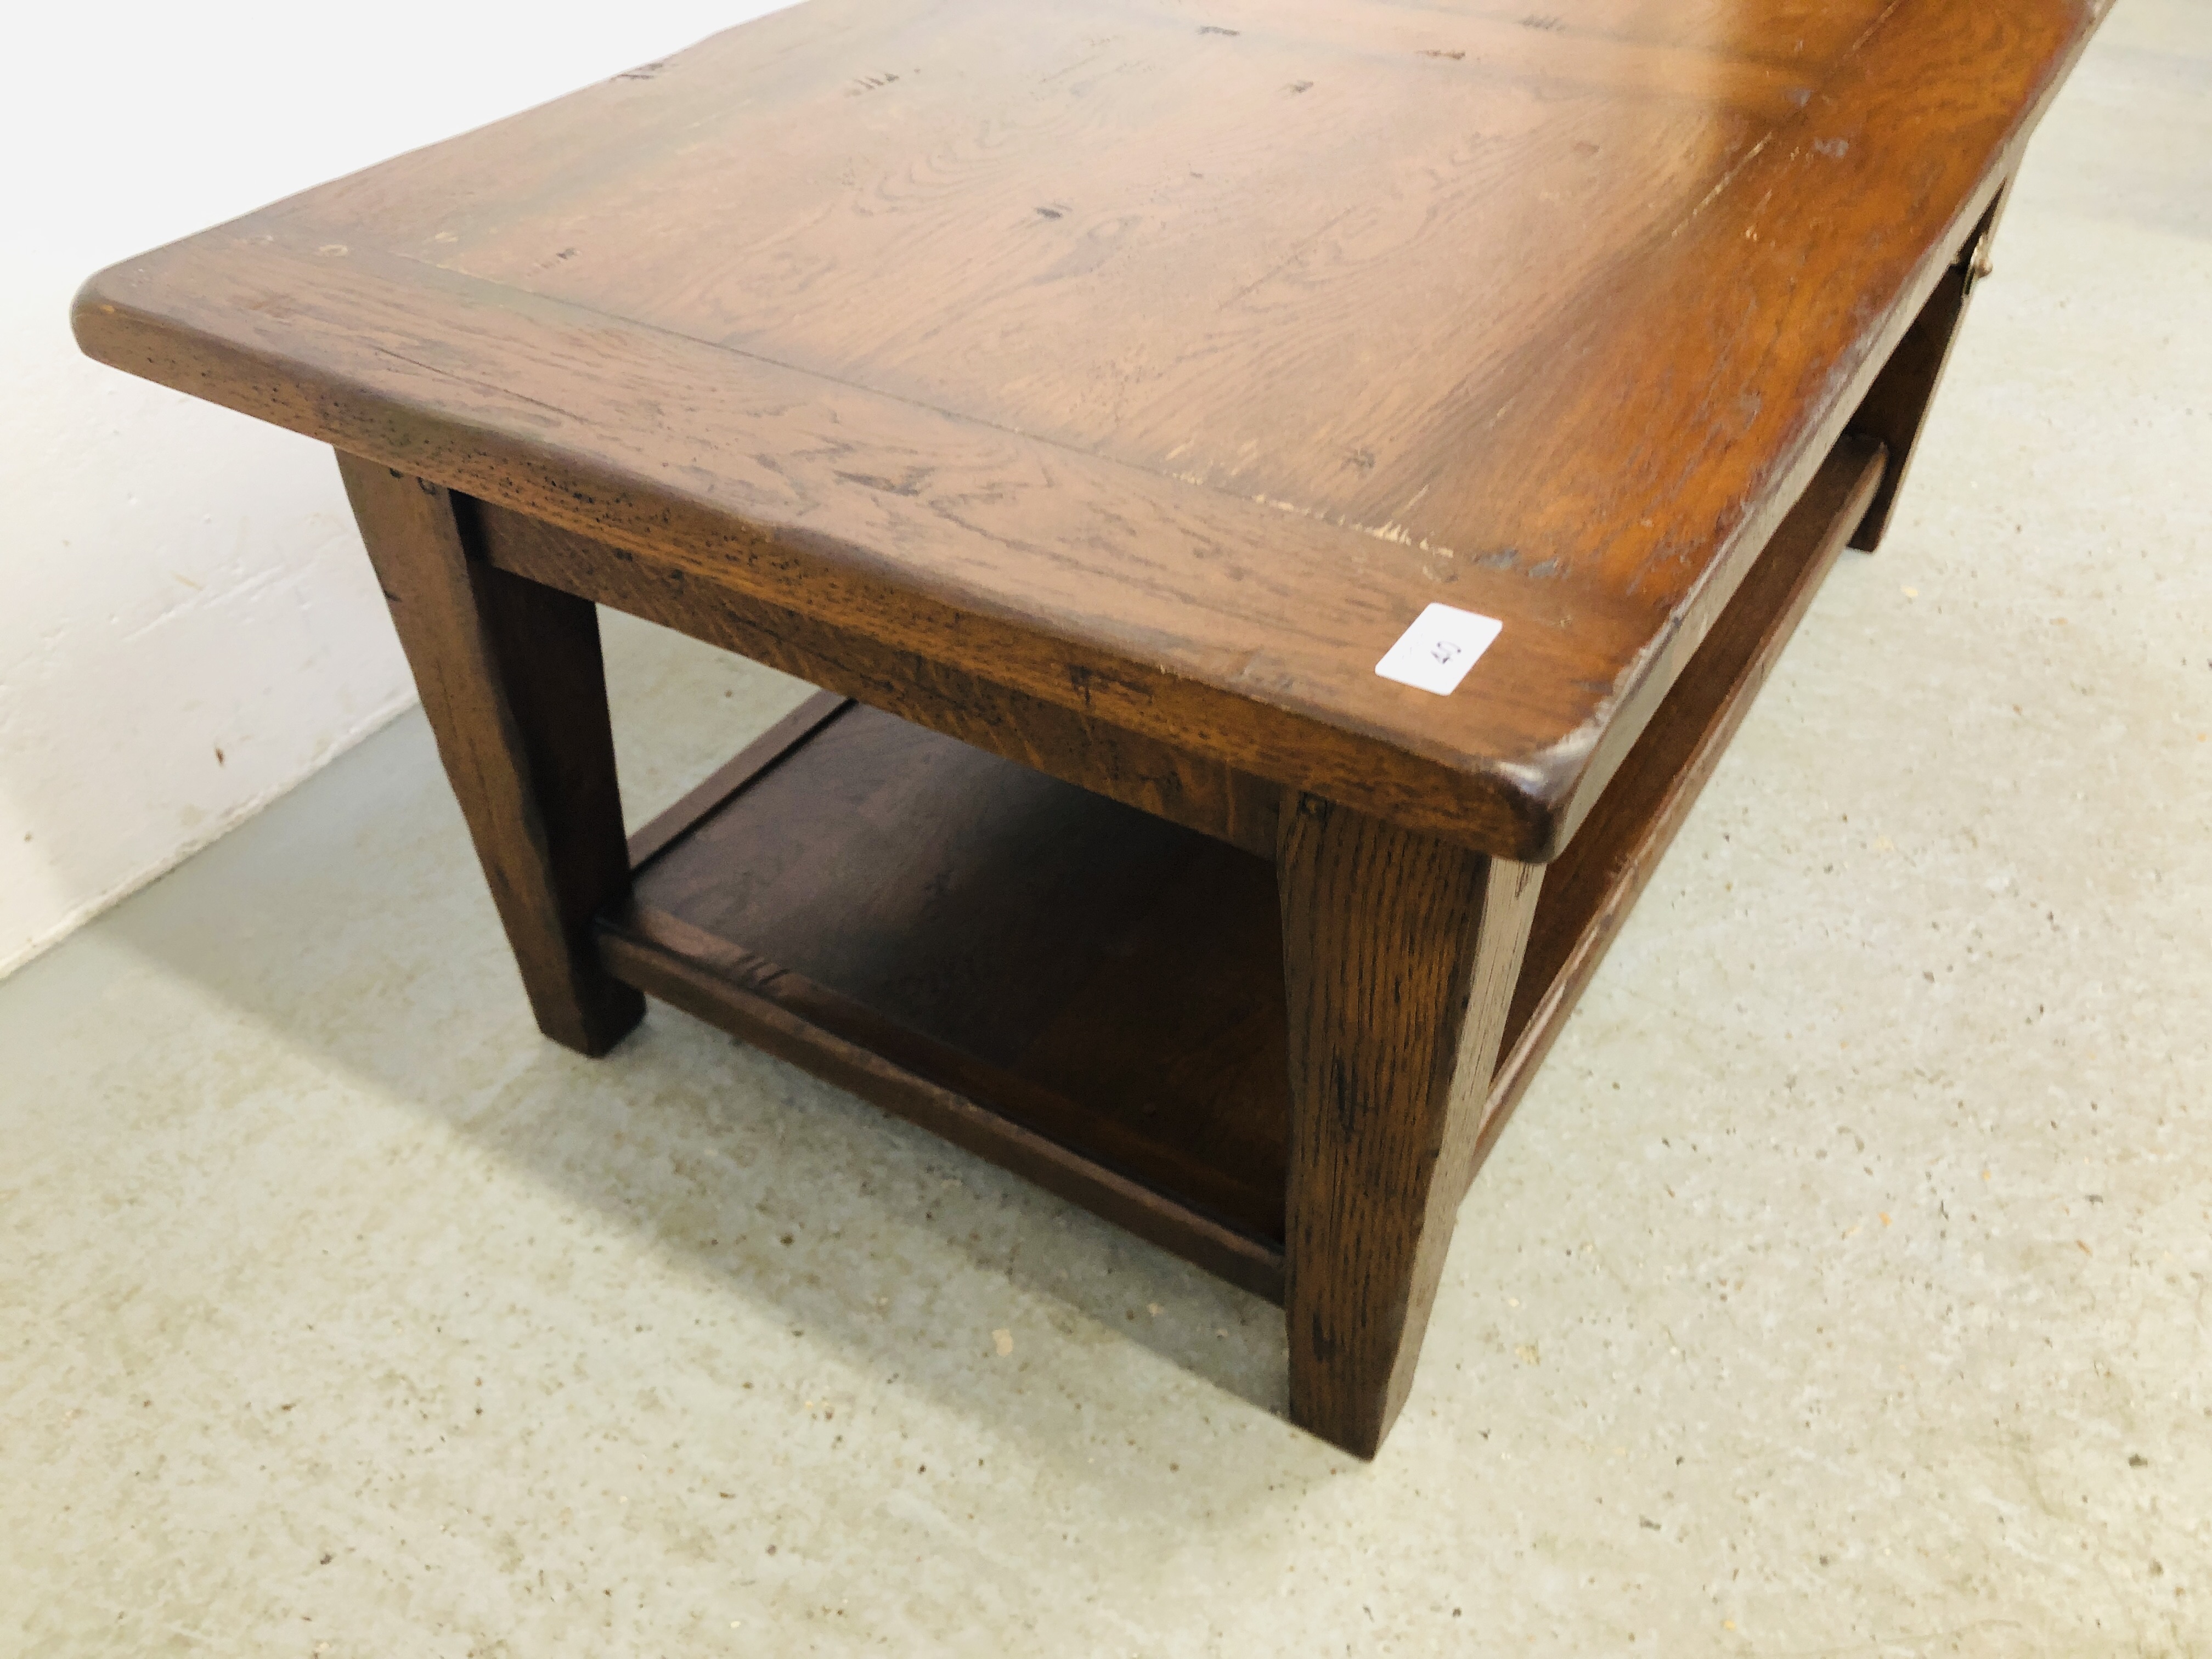 A SOLID OAK SINGLE DRAWER TWO TIER COFFEE TABLE W 59CM, L 110CM, H 46CM. - Image 7 of 7